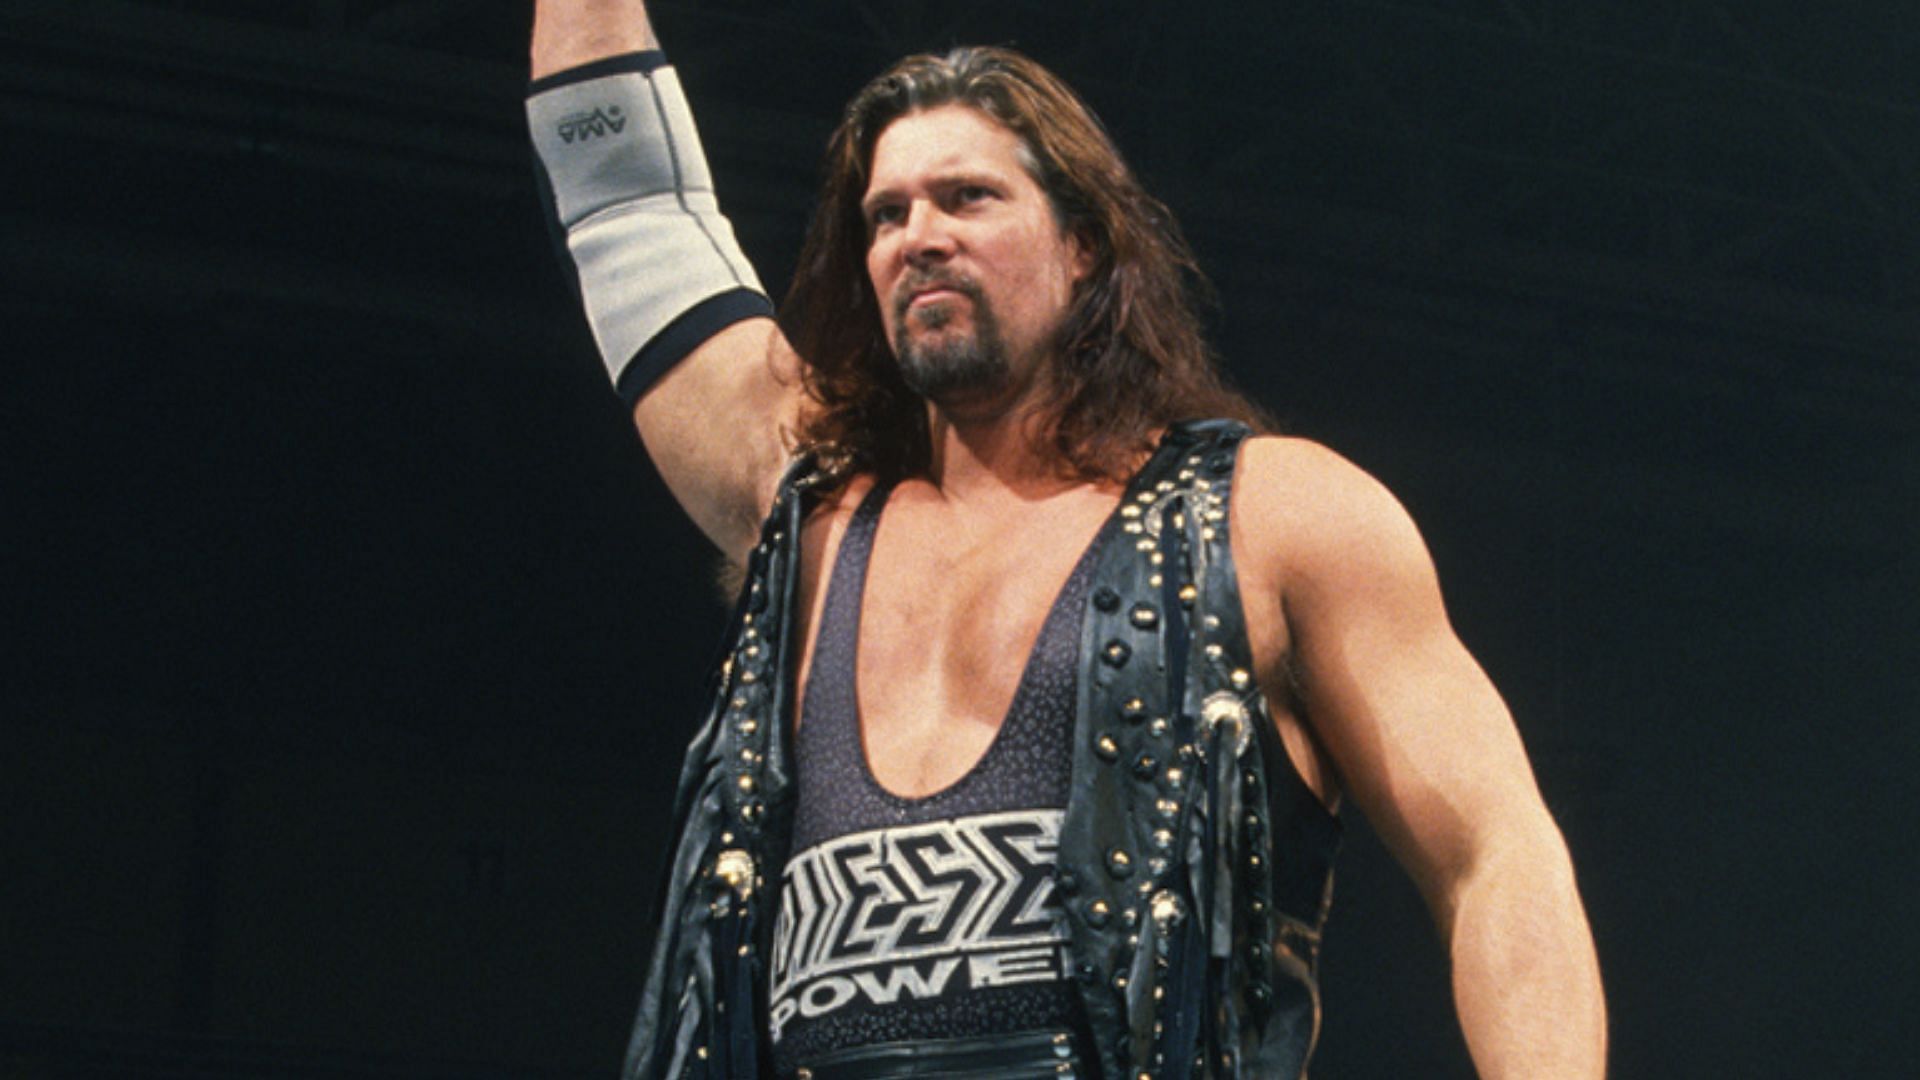 Kevin Nash as Diesel during his time with WWE